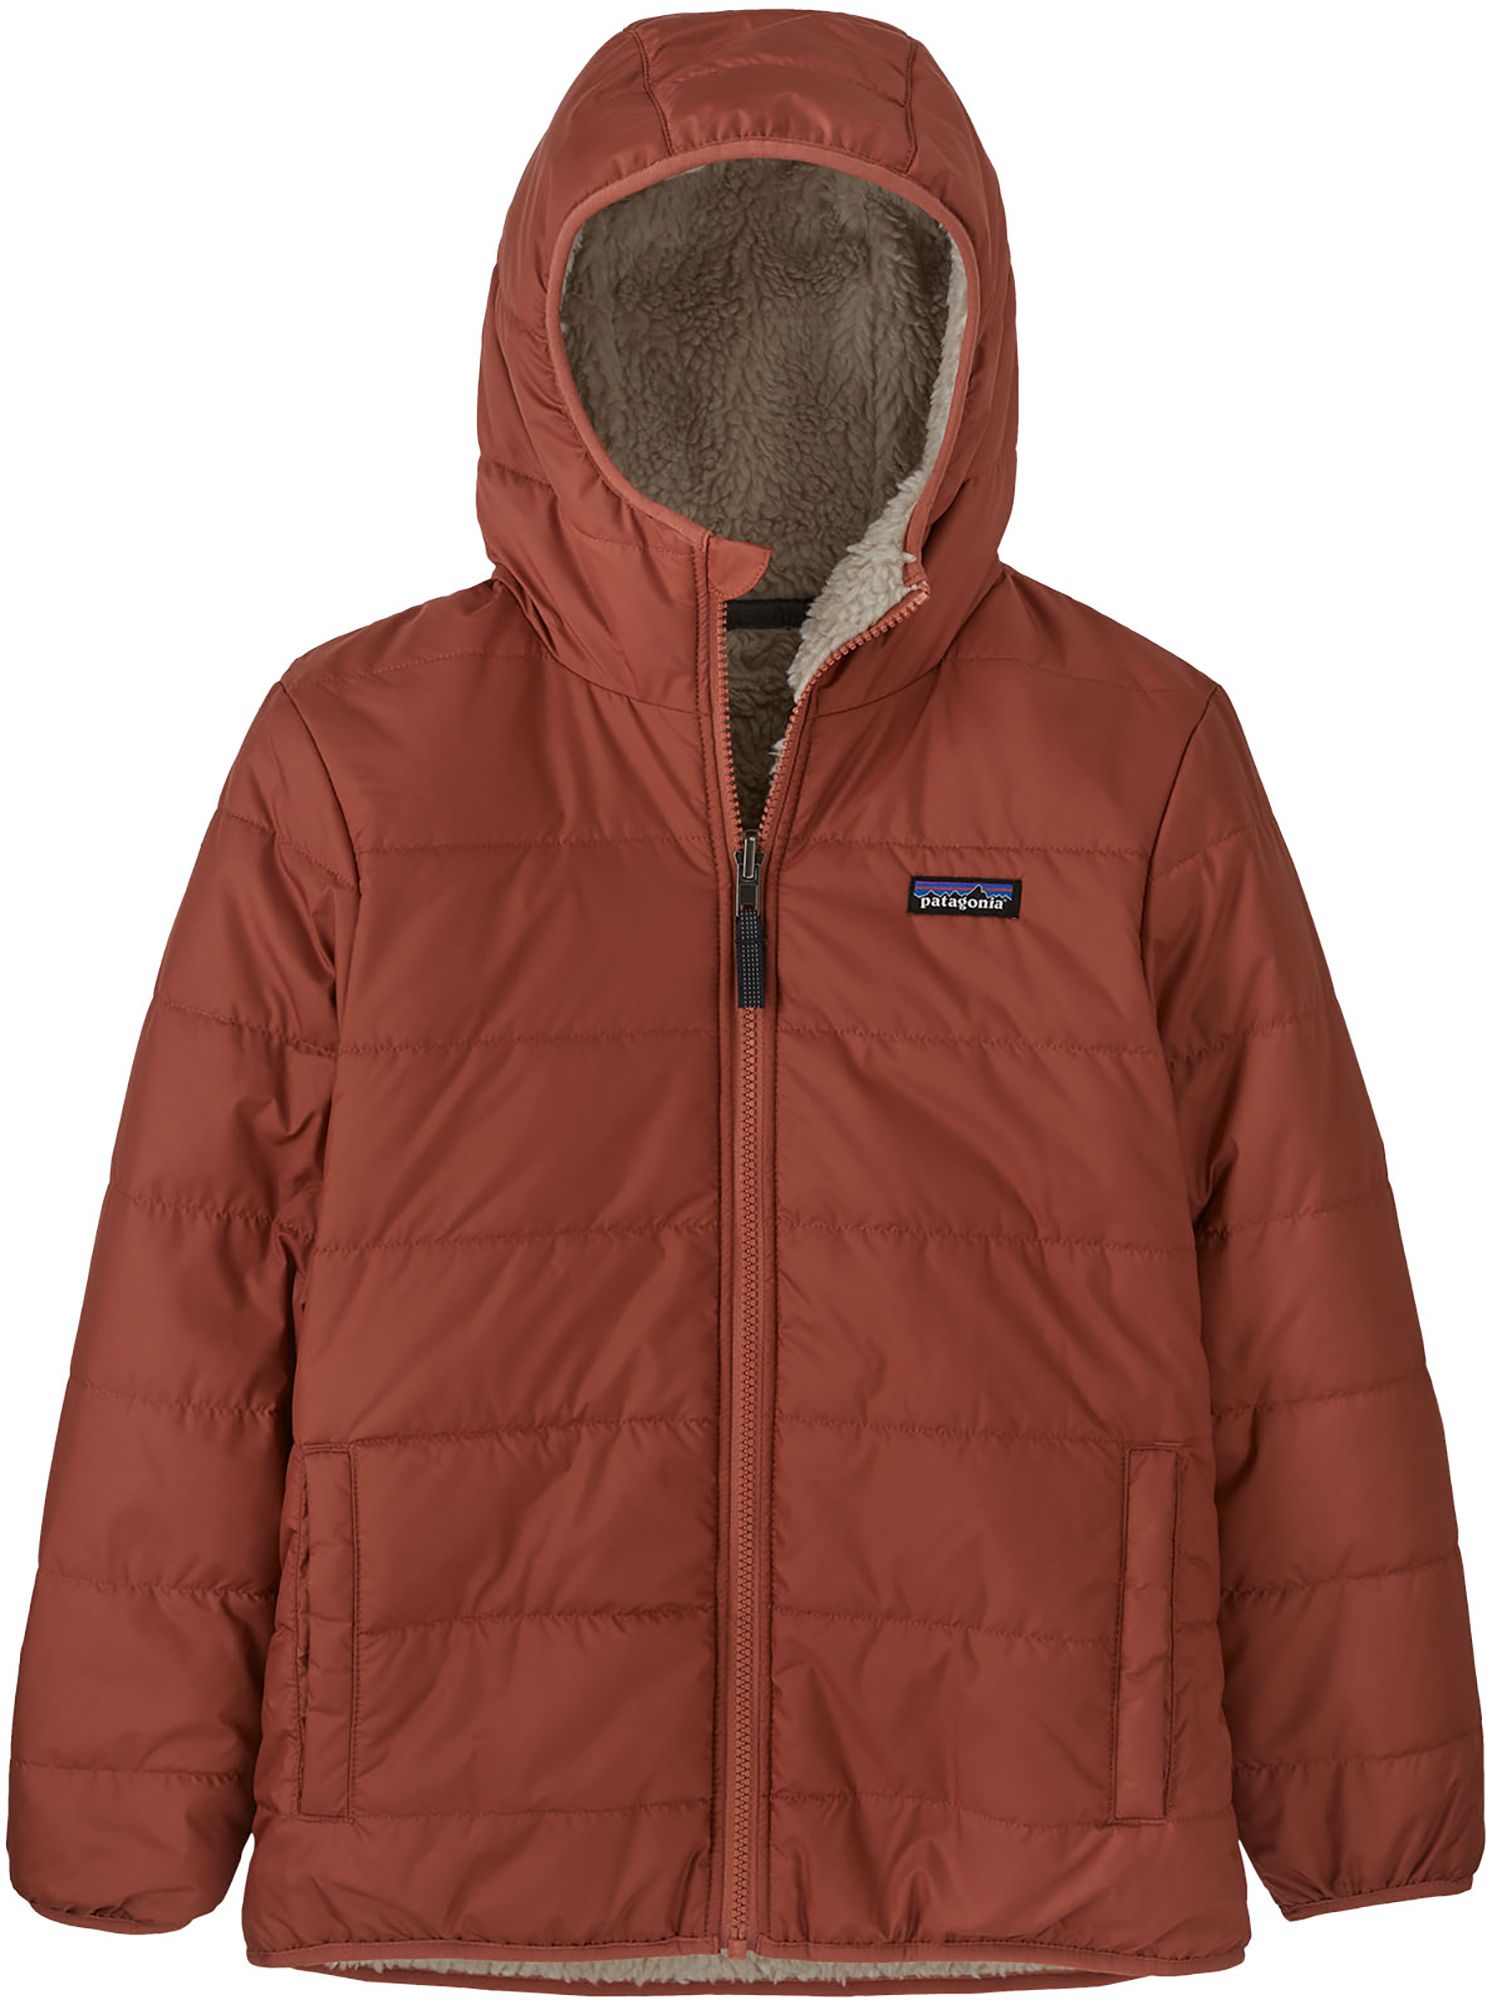 Patagonia Boys' Reversible Ready Freddy Hooded Jacket | Dick's Sporting  Goods